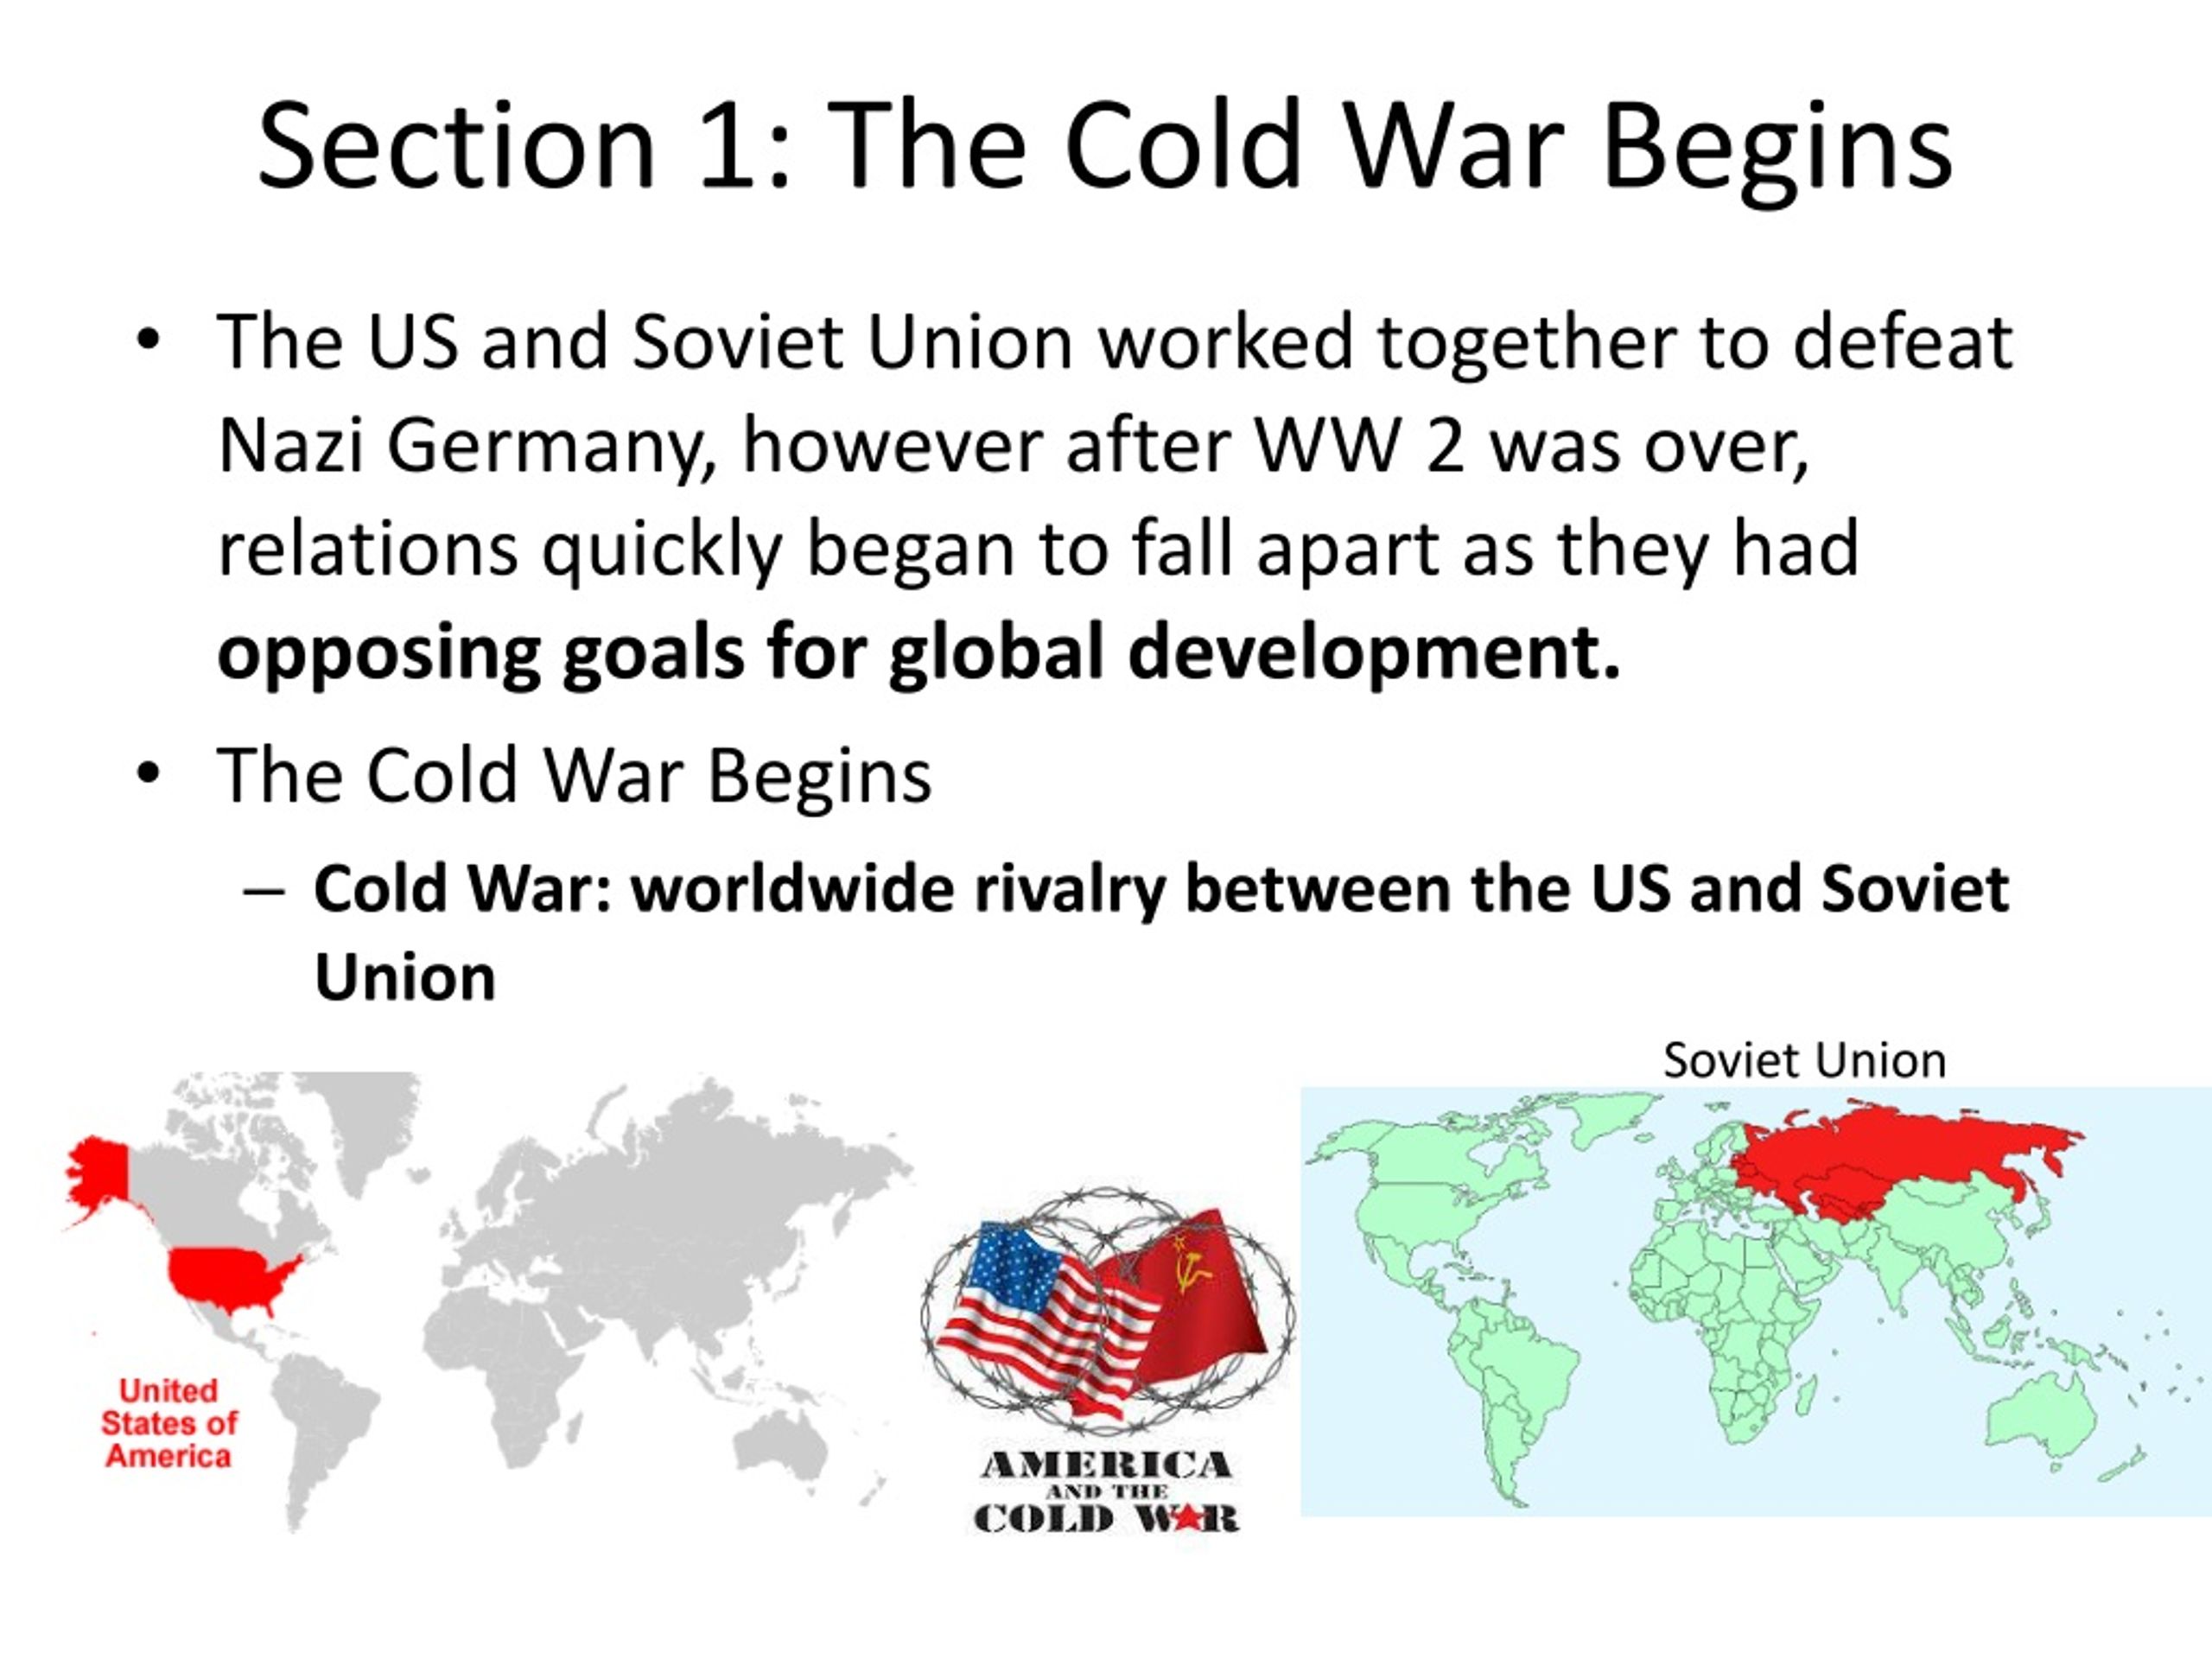 why is it called the cold war?